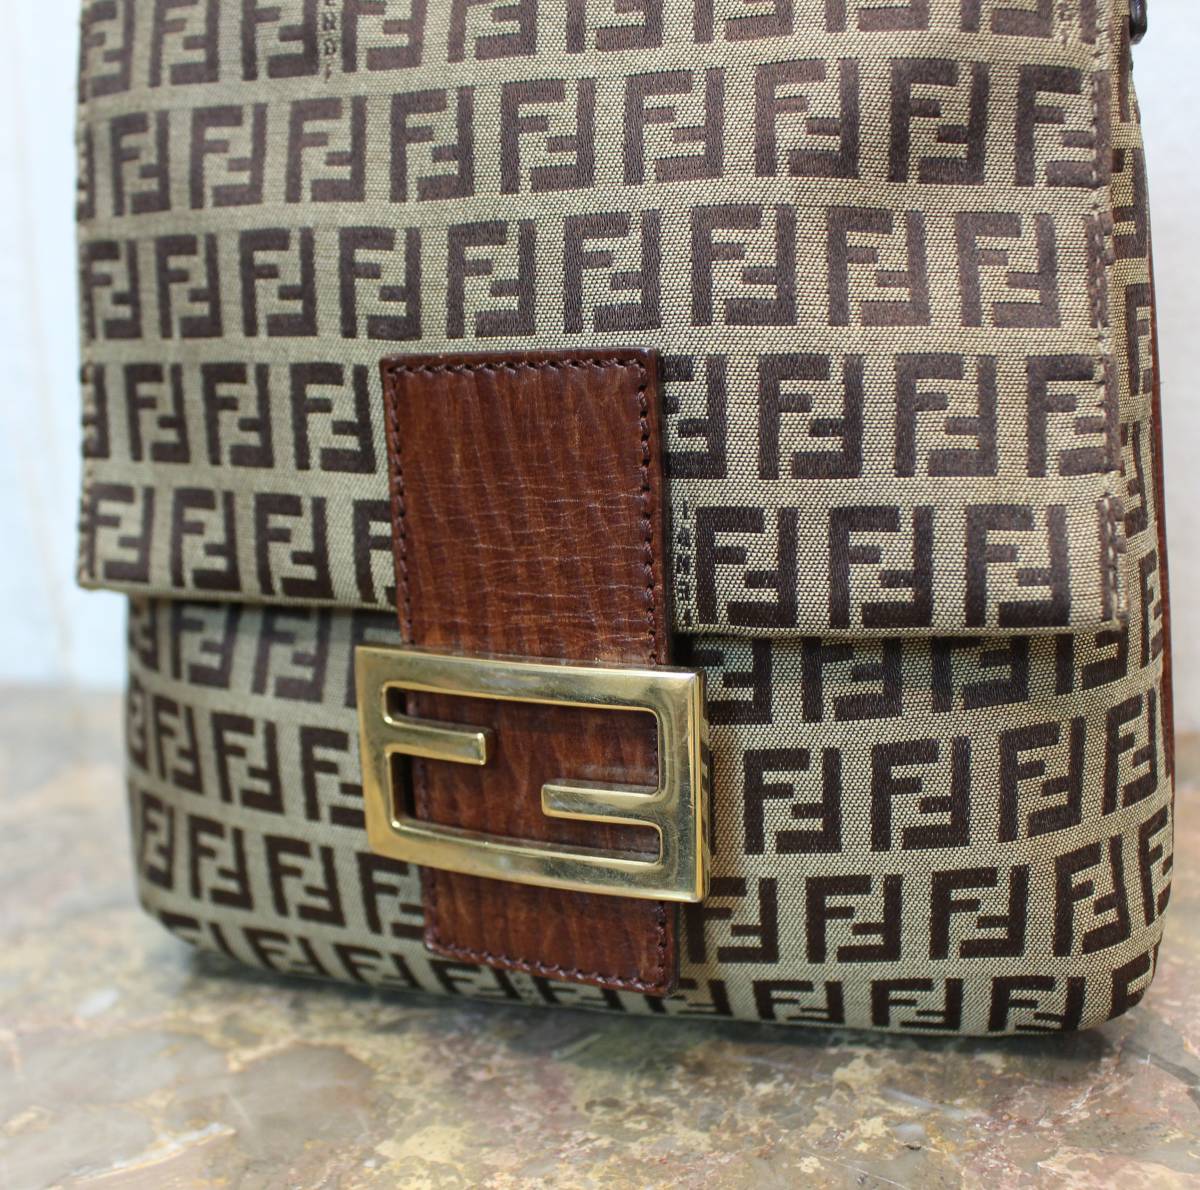 FENDI ZUCCA PATTERNED SHOULDER BAG MADE IN ITALY/フェンディズッカ柄ショルダーバッグ_画像2